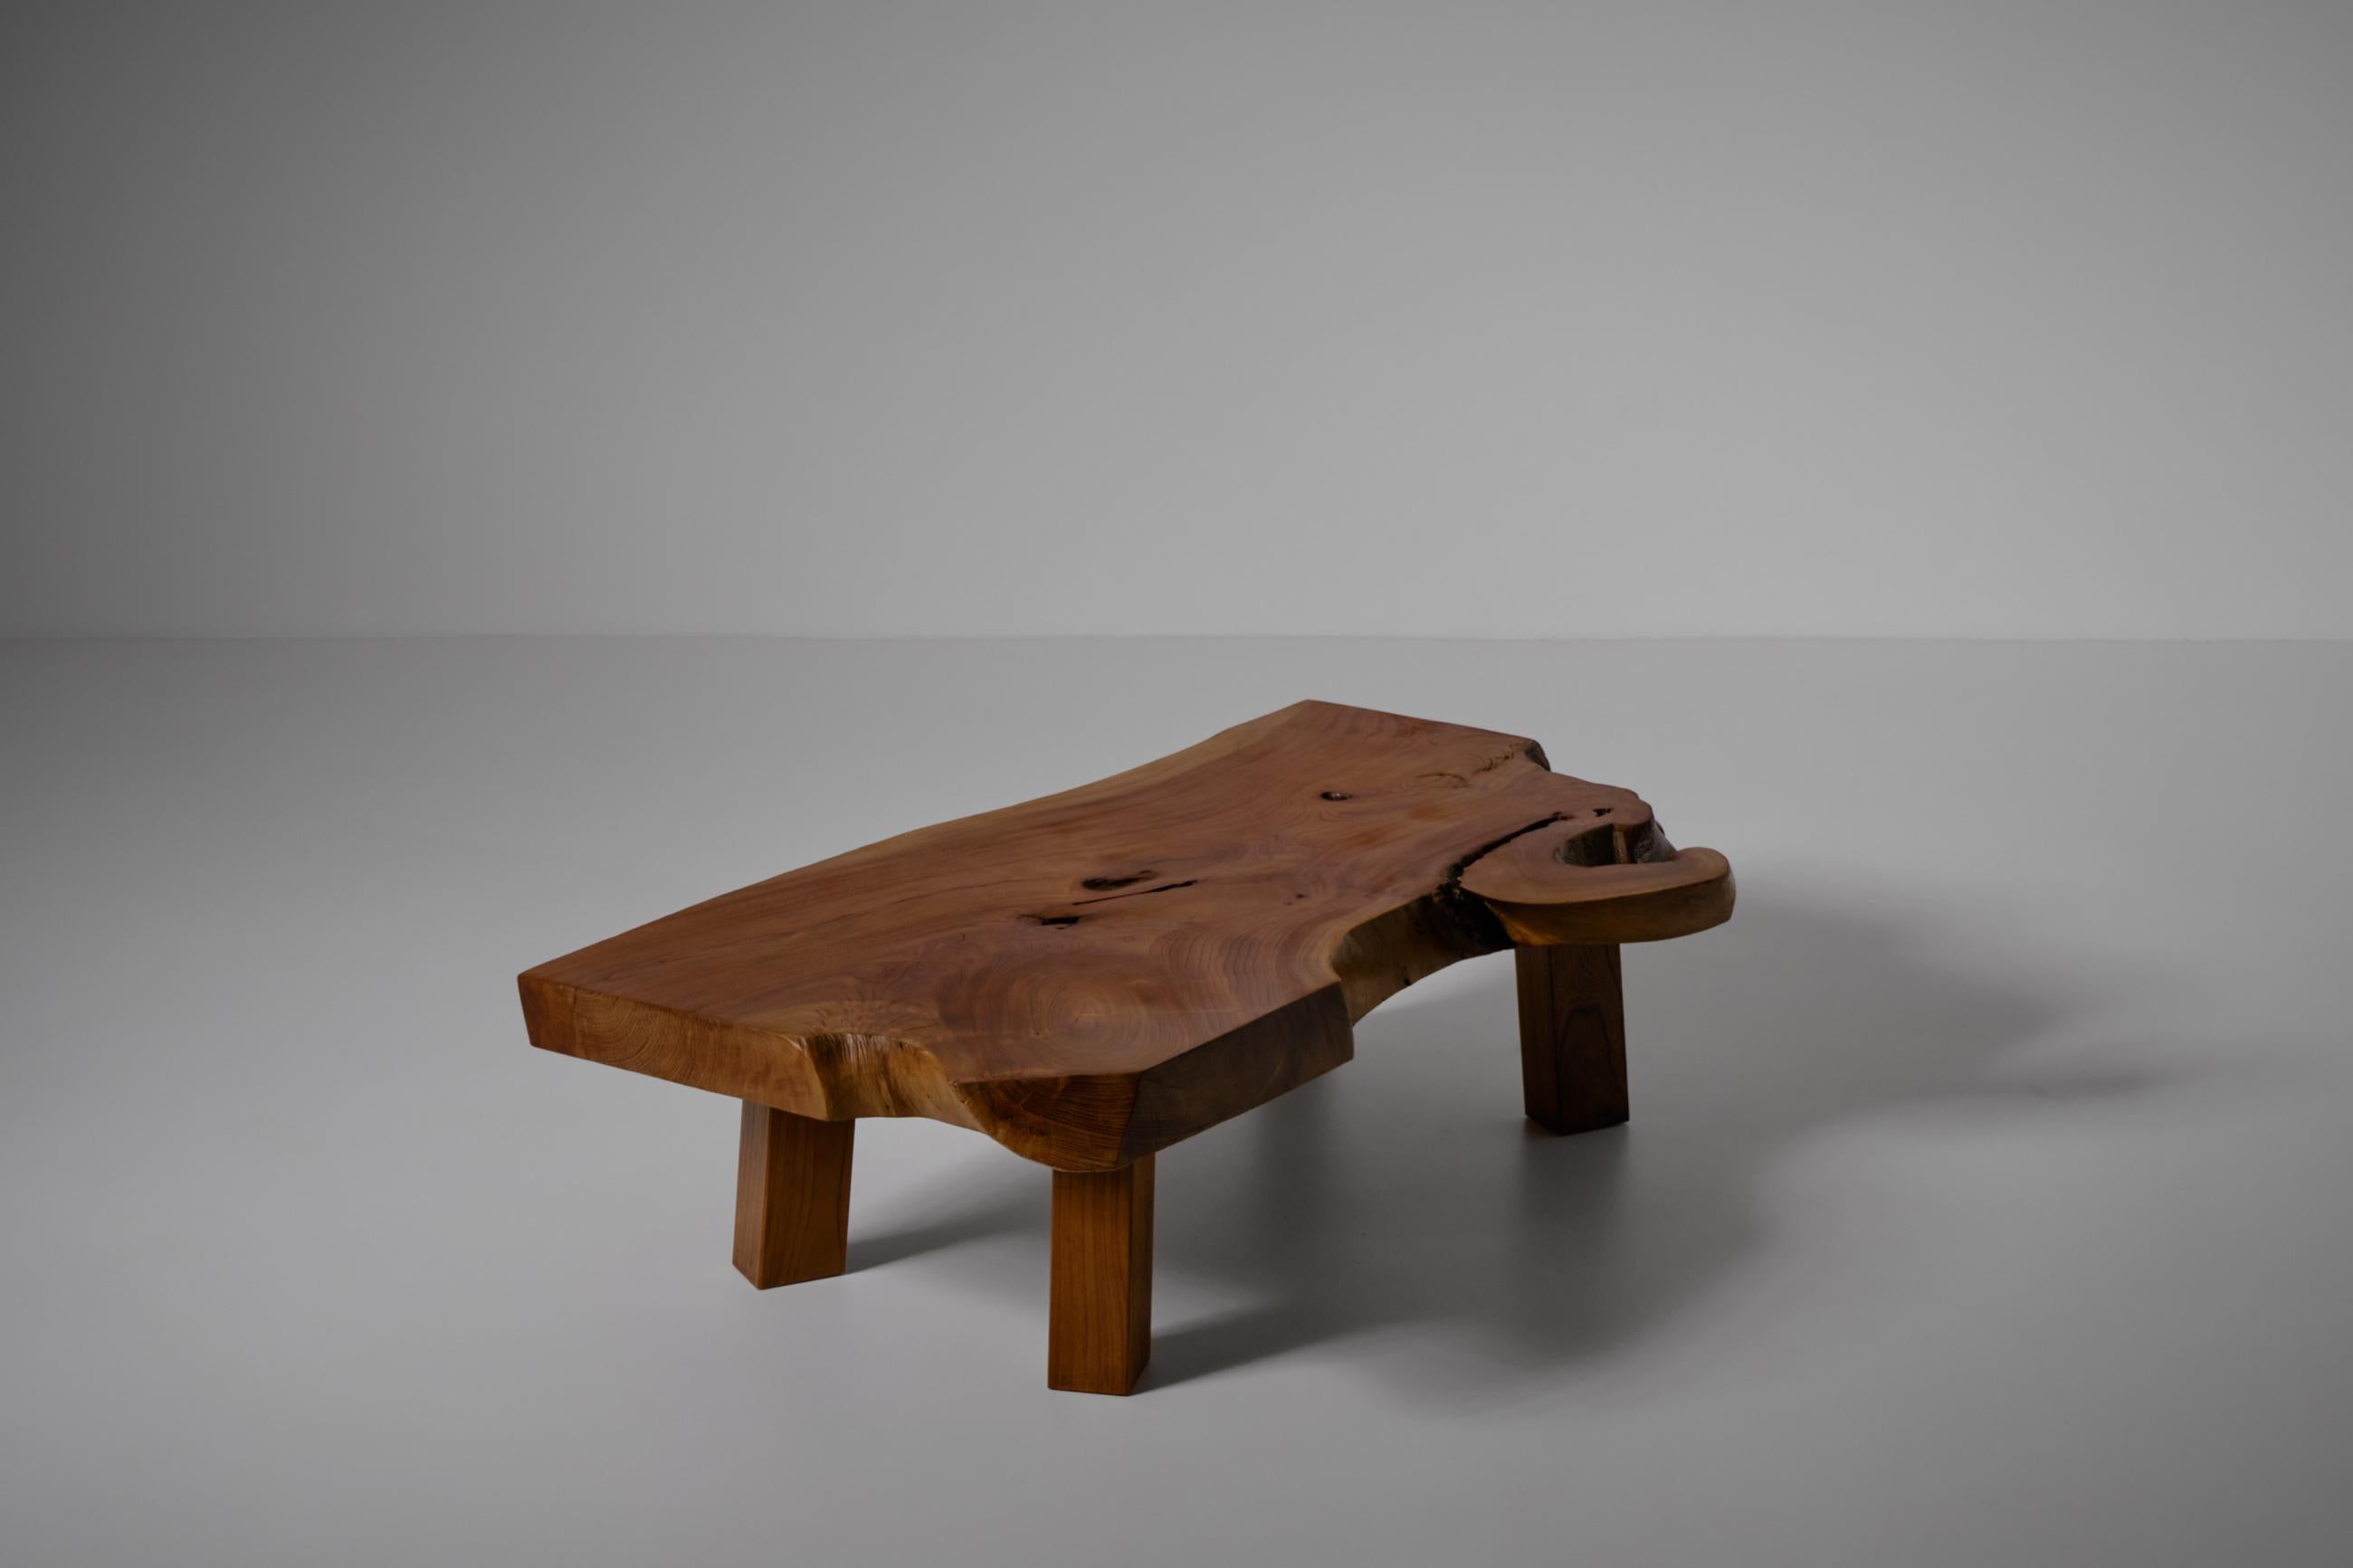 Japanese elm wooden coffee table, Japan 1970s. The table is made from a beautiful slab of Elm wood with an incredible wood grain. The table stands on four strong sturdy block legs.
In very good original condition.